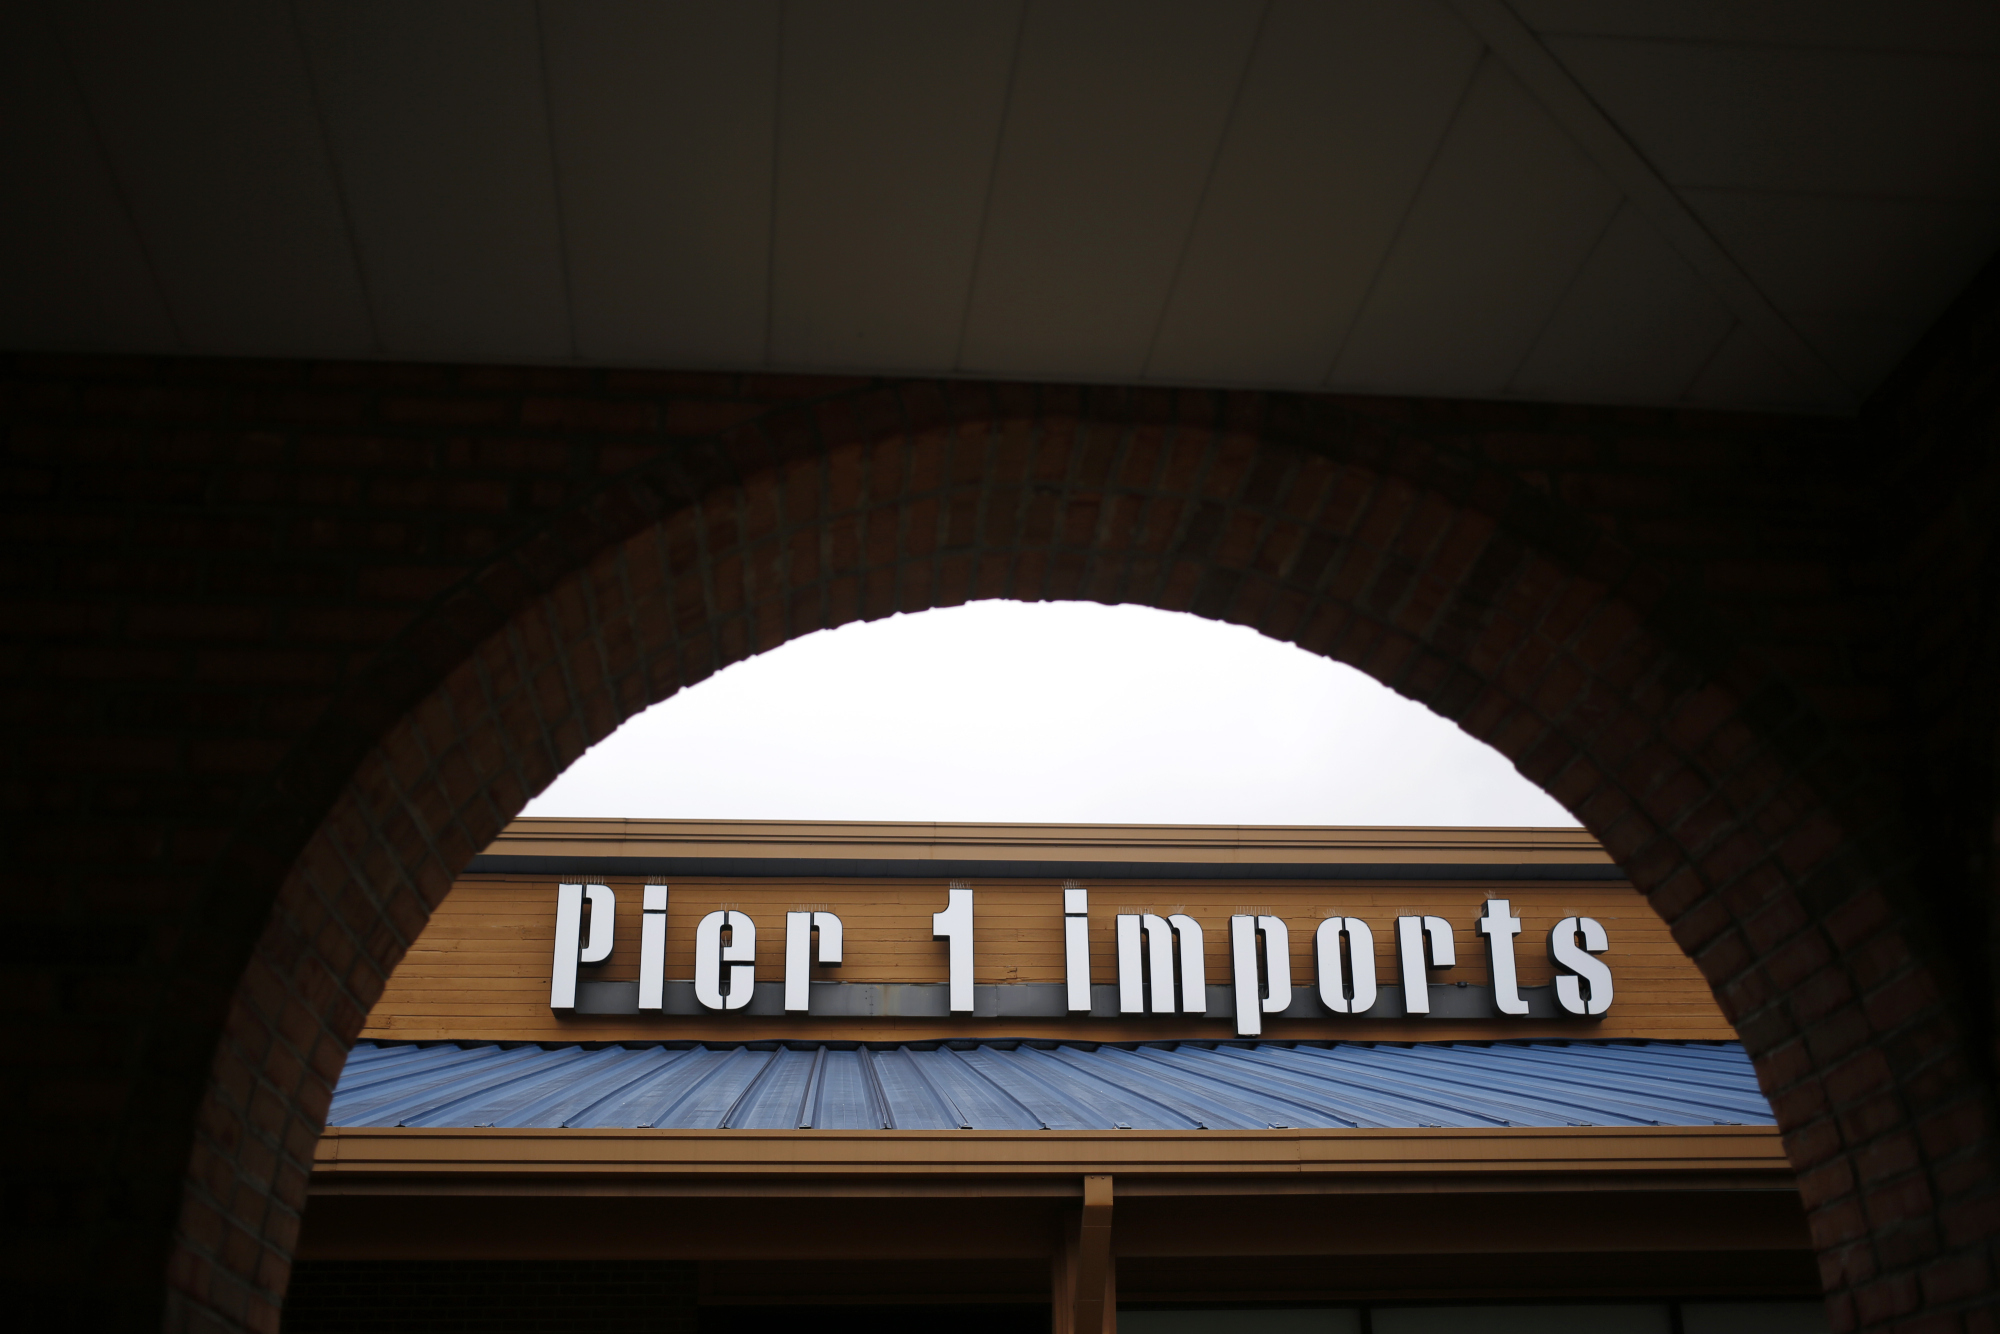 Signage is displayed outside a Pier 1 Imports Inc. retail store in Louisville, Kentucky.